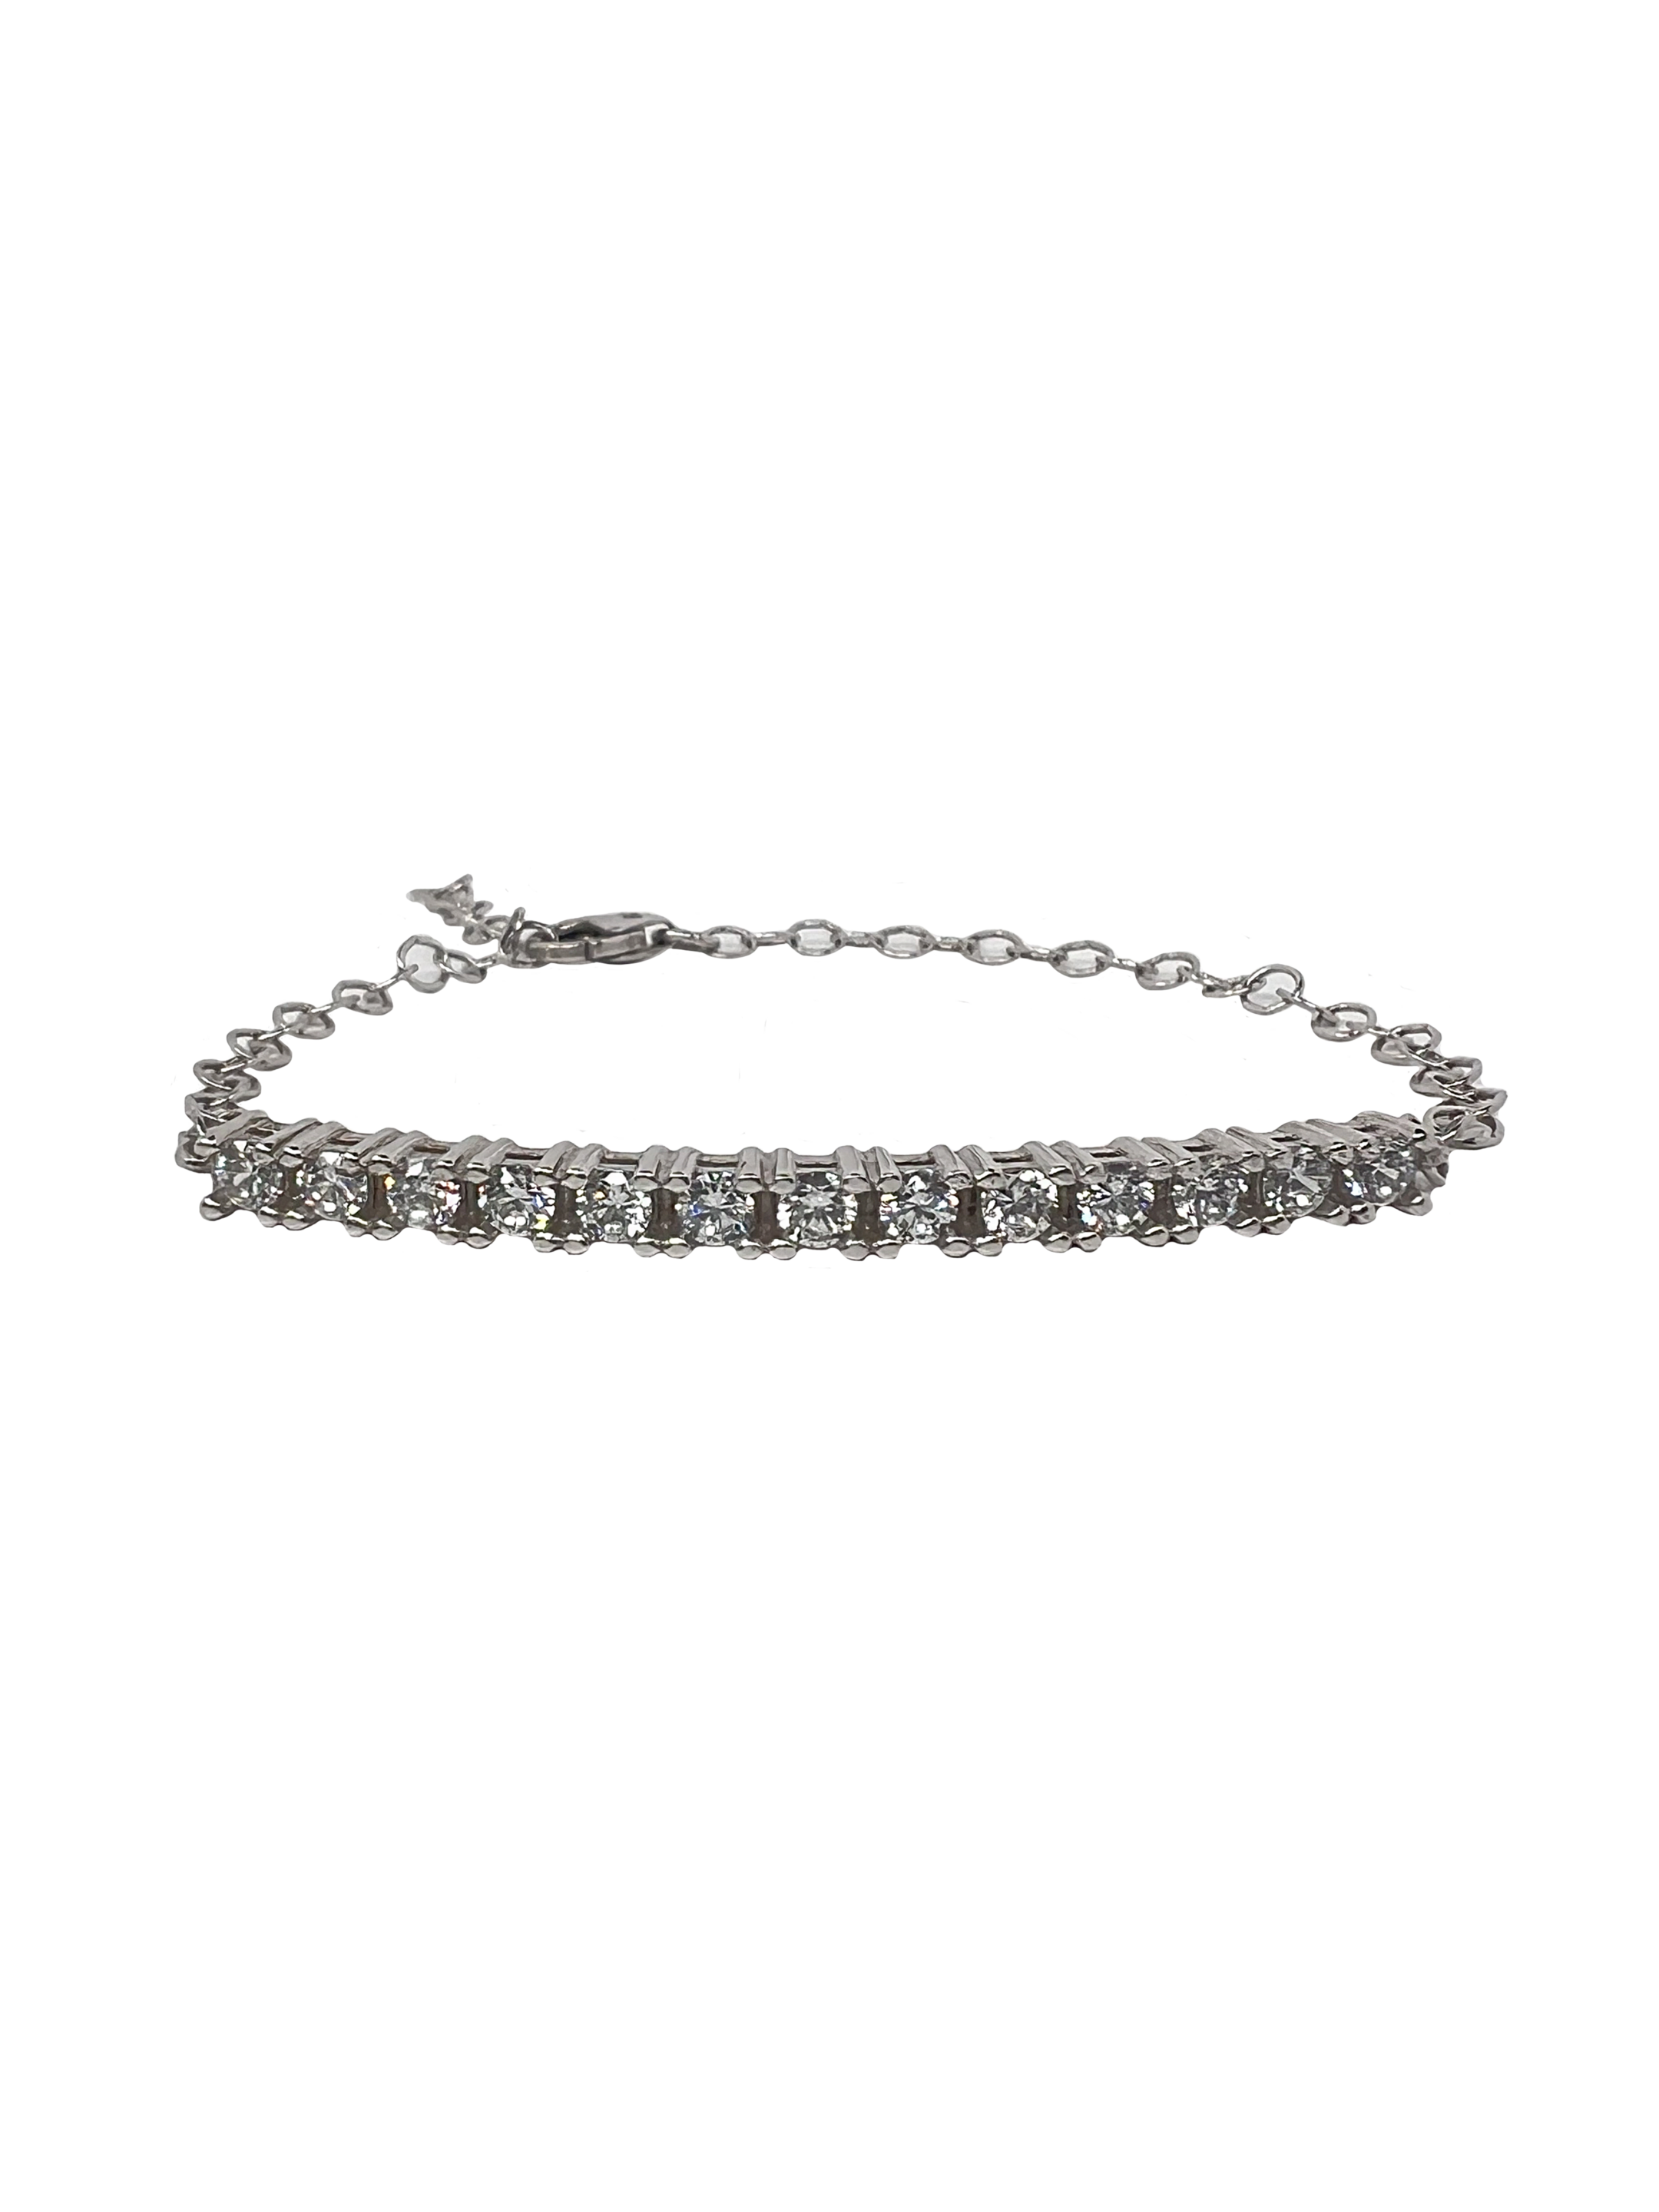 Silver modern bracelet with crystals